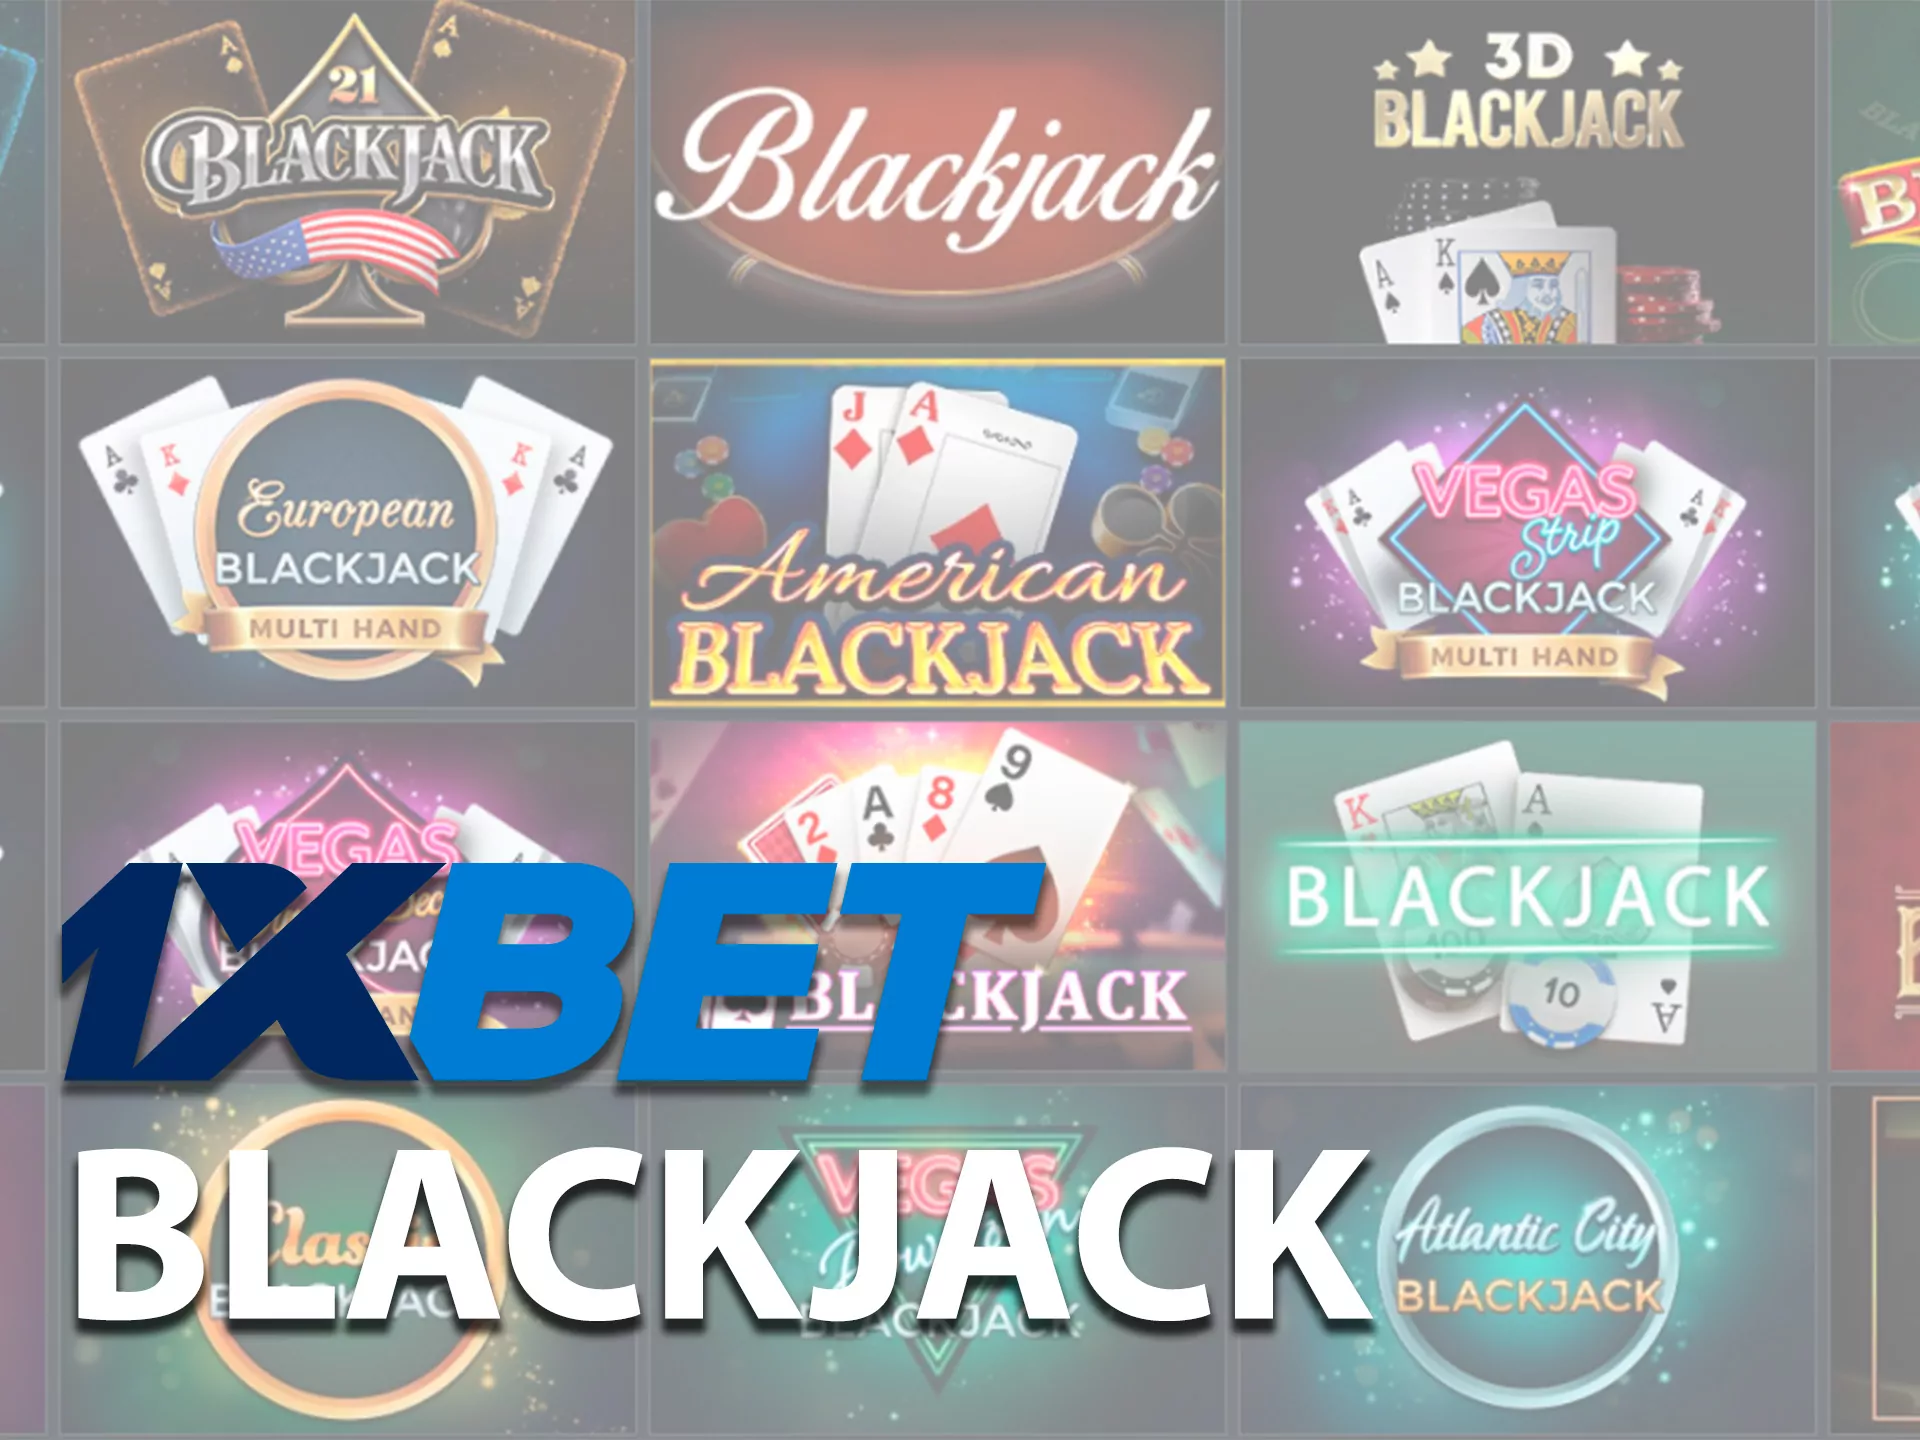 You can also play blackjack at the 1xbet casino.